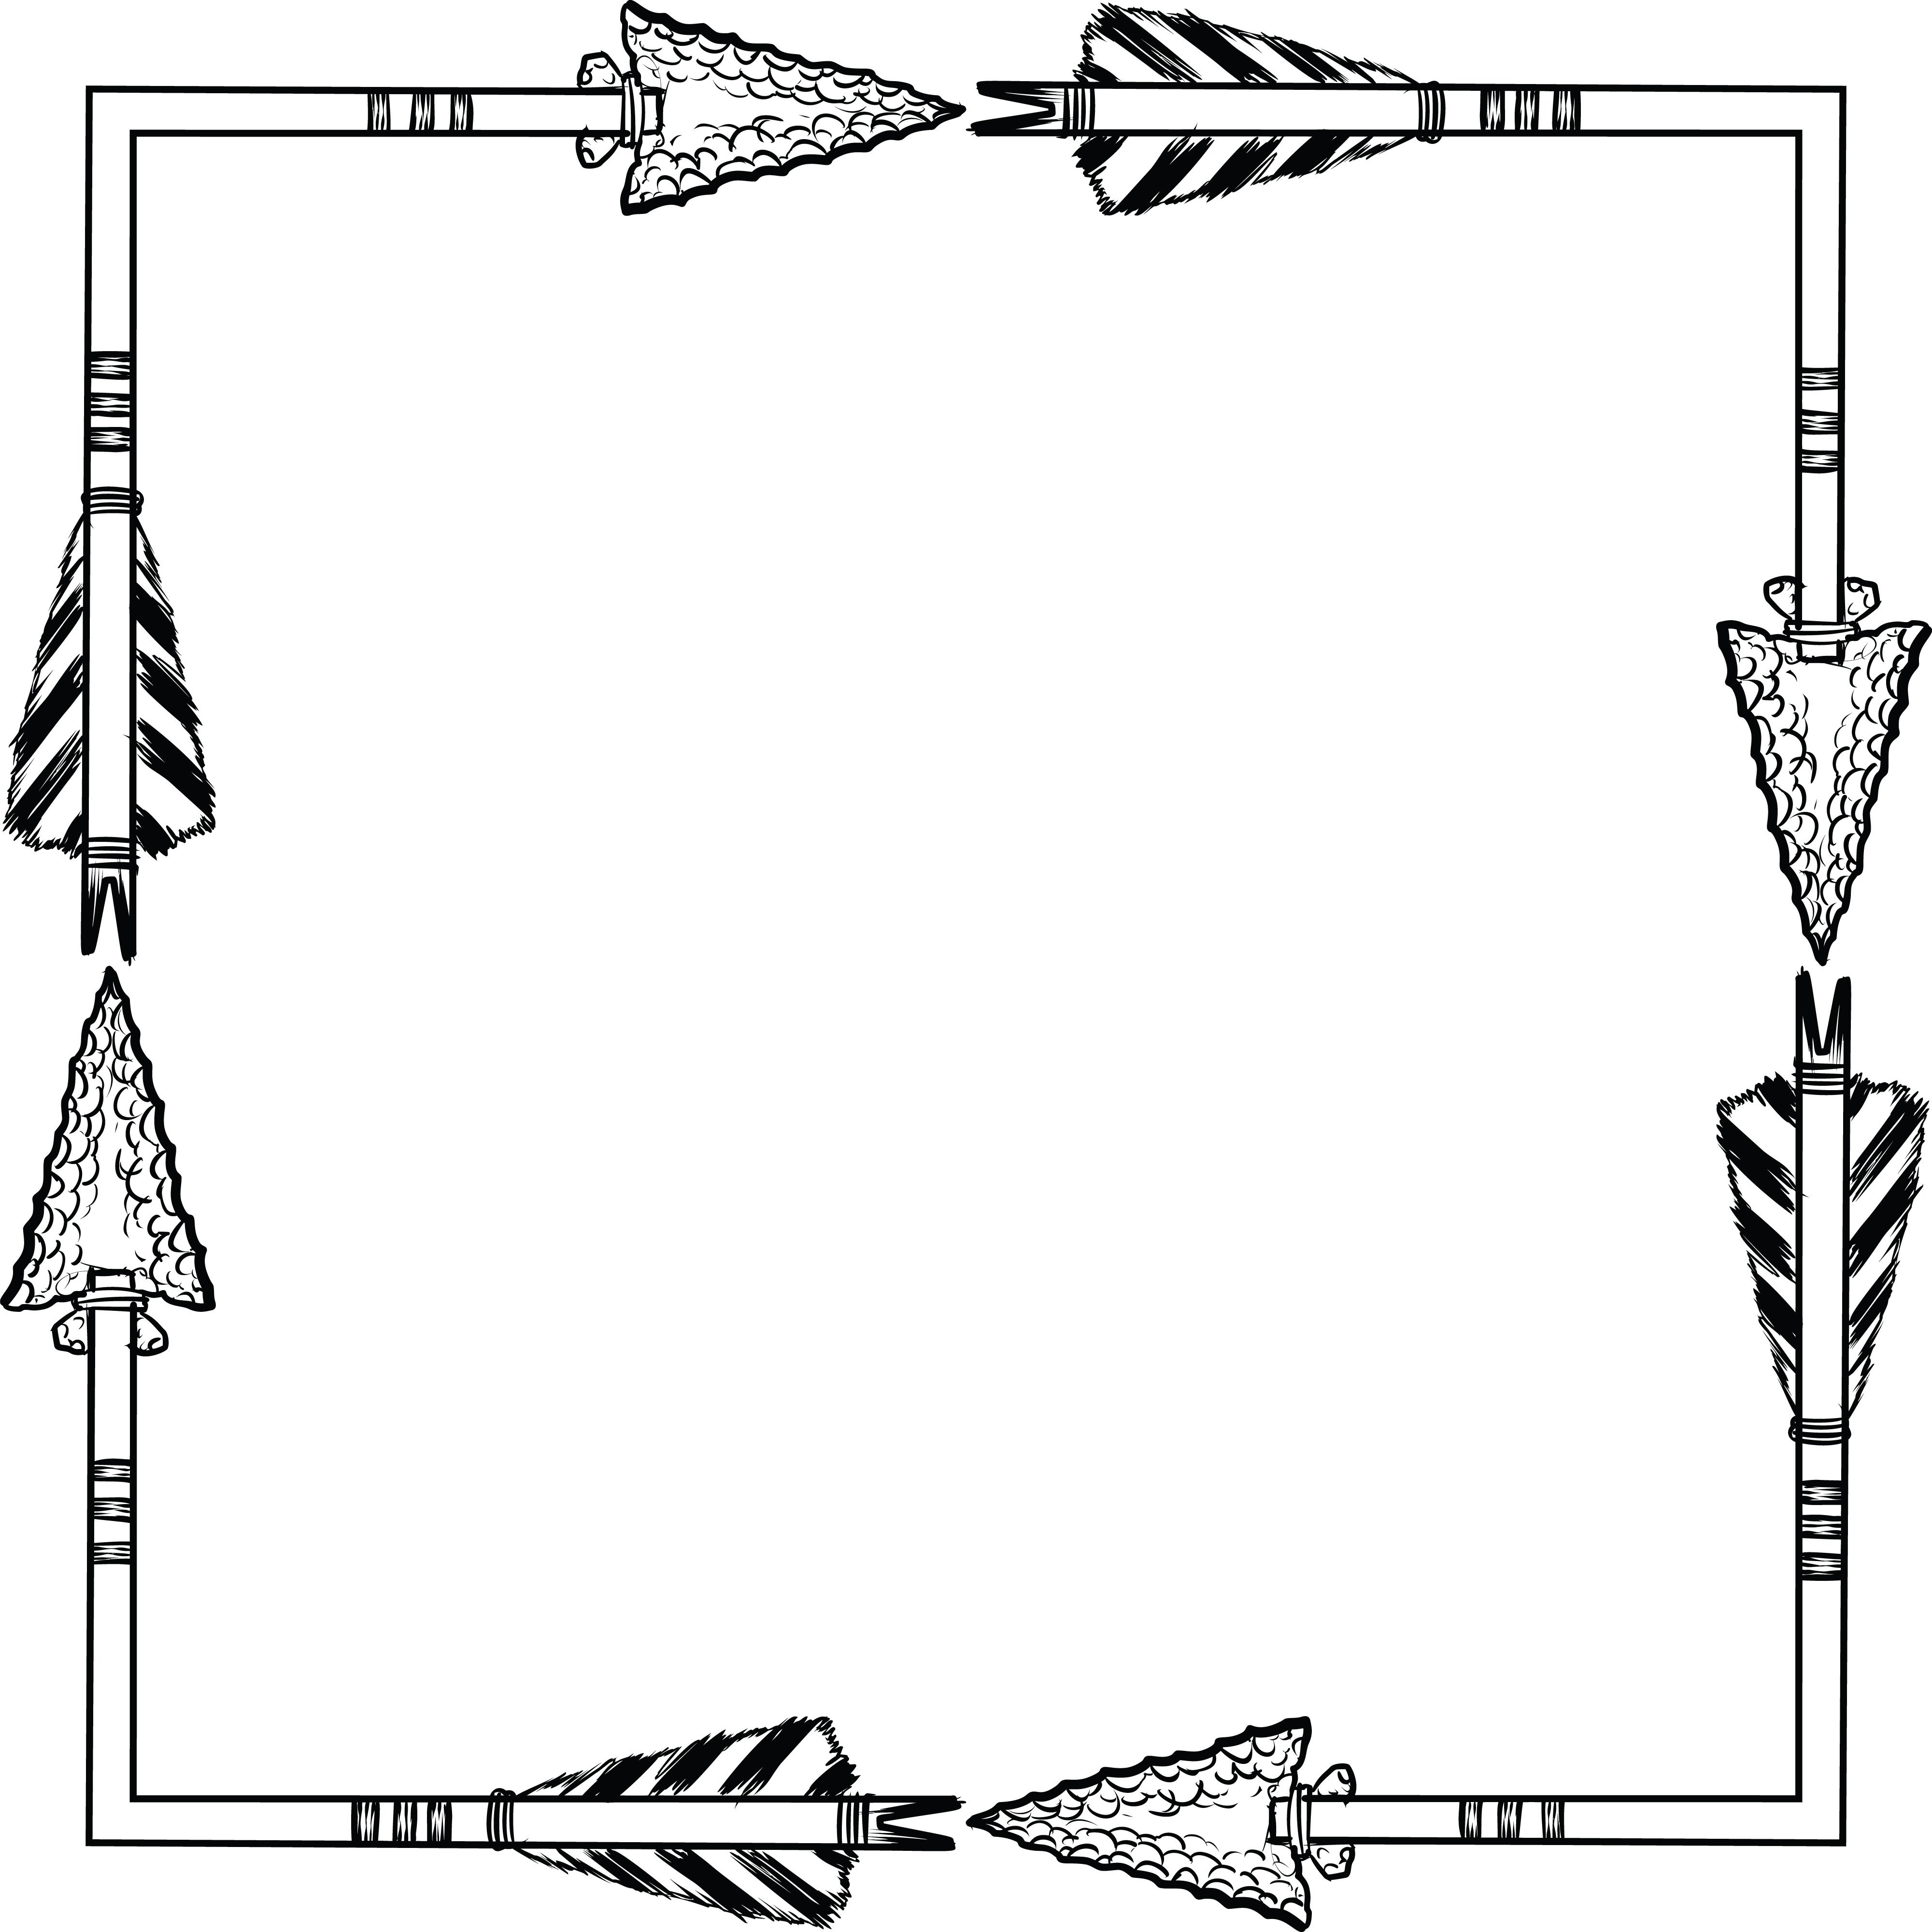 Download Free Clipart Of A Flint Arrow Square Shaped Frame